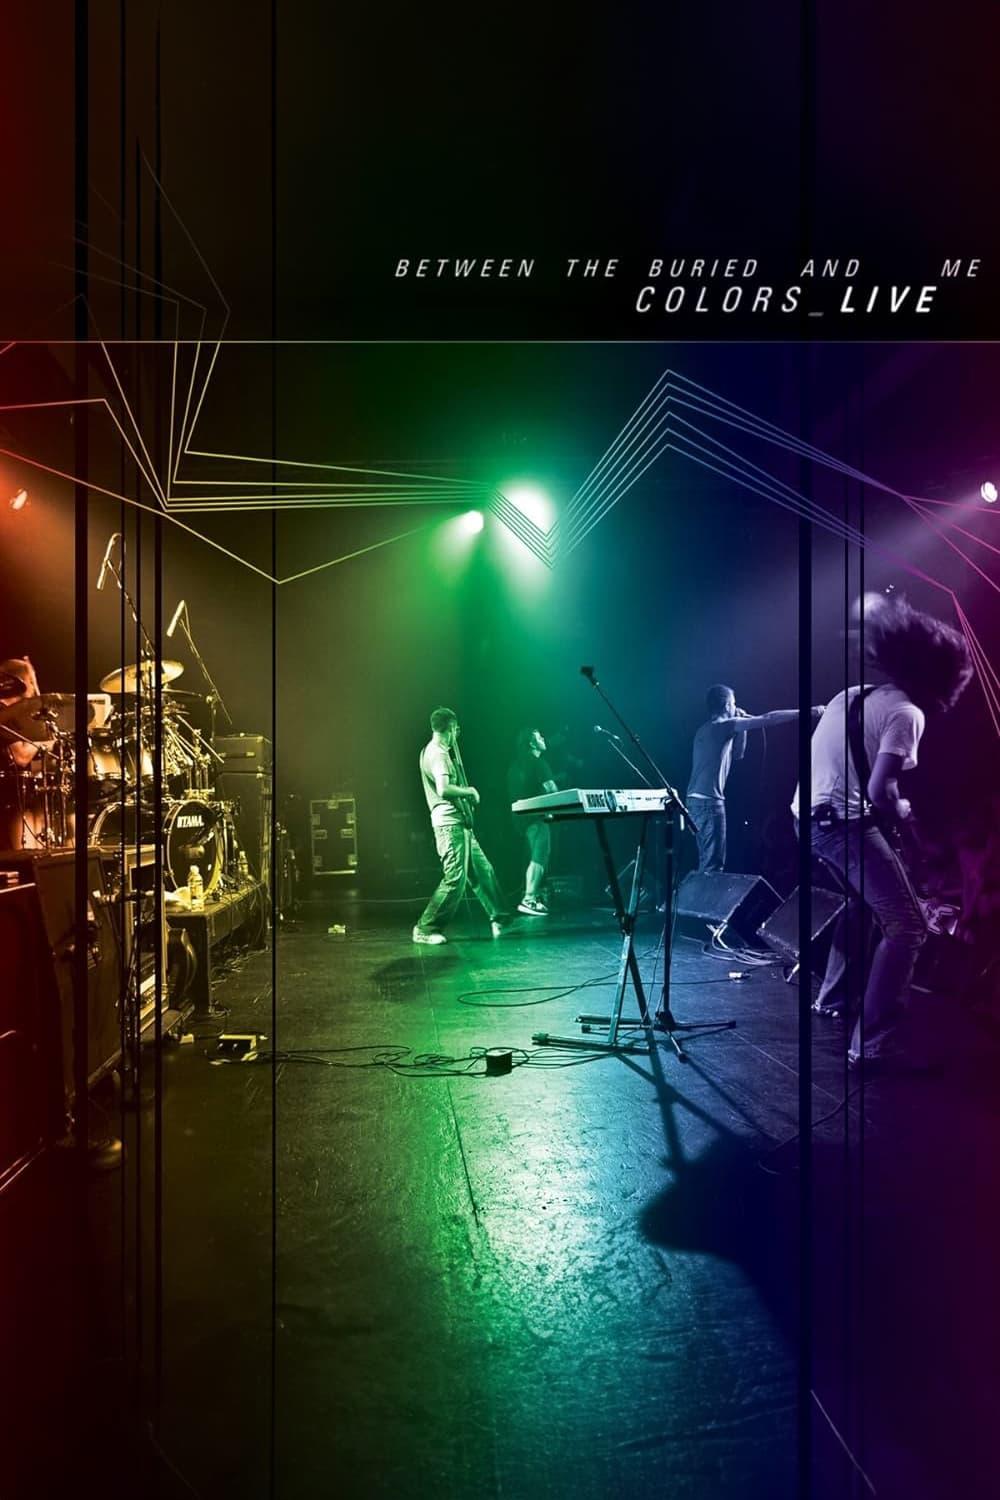 Between the Buried and Me: Colors_LIVE poster